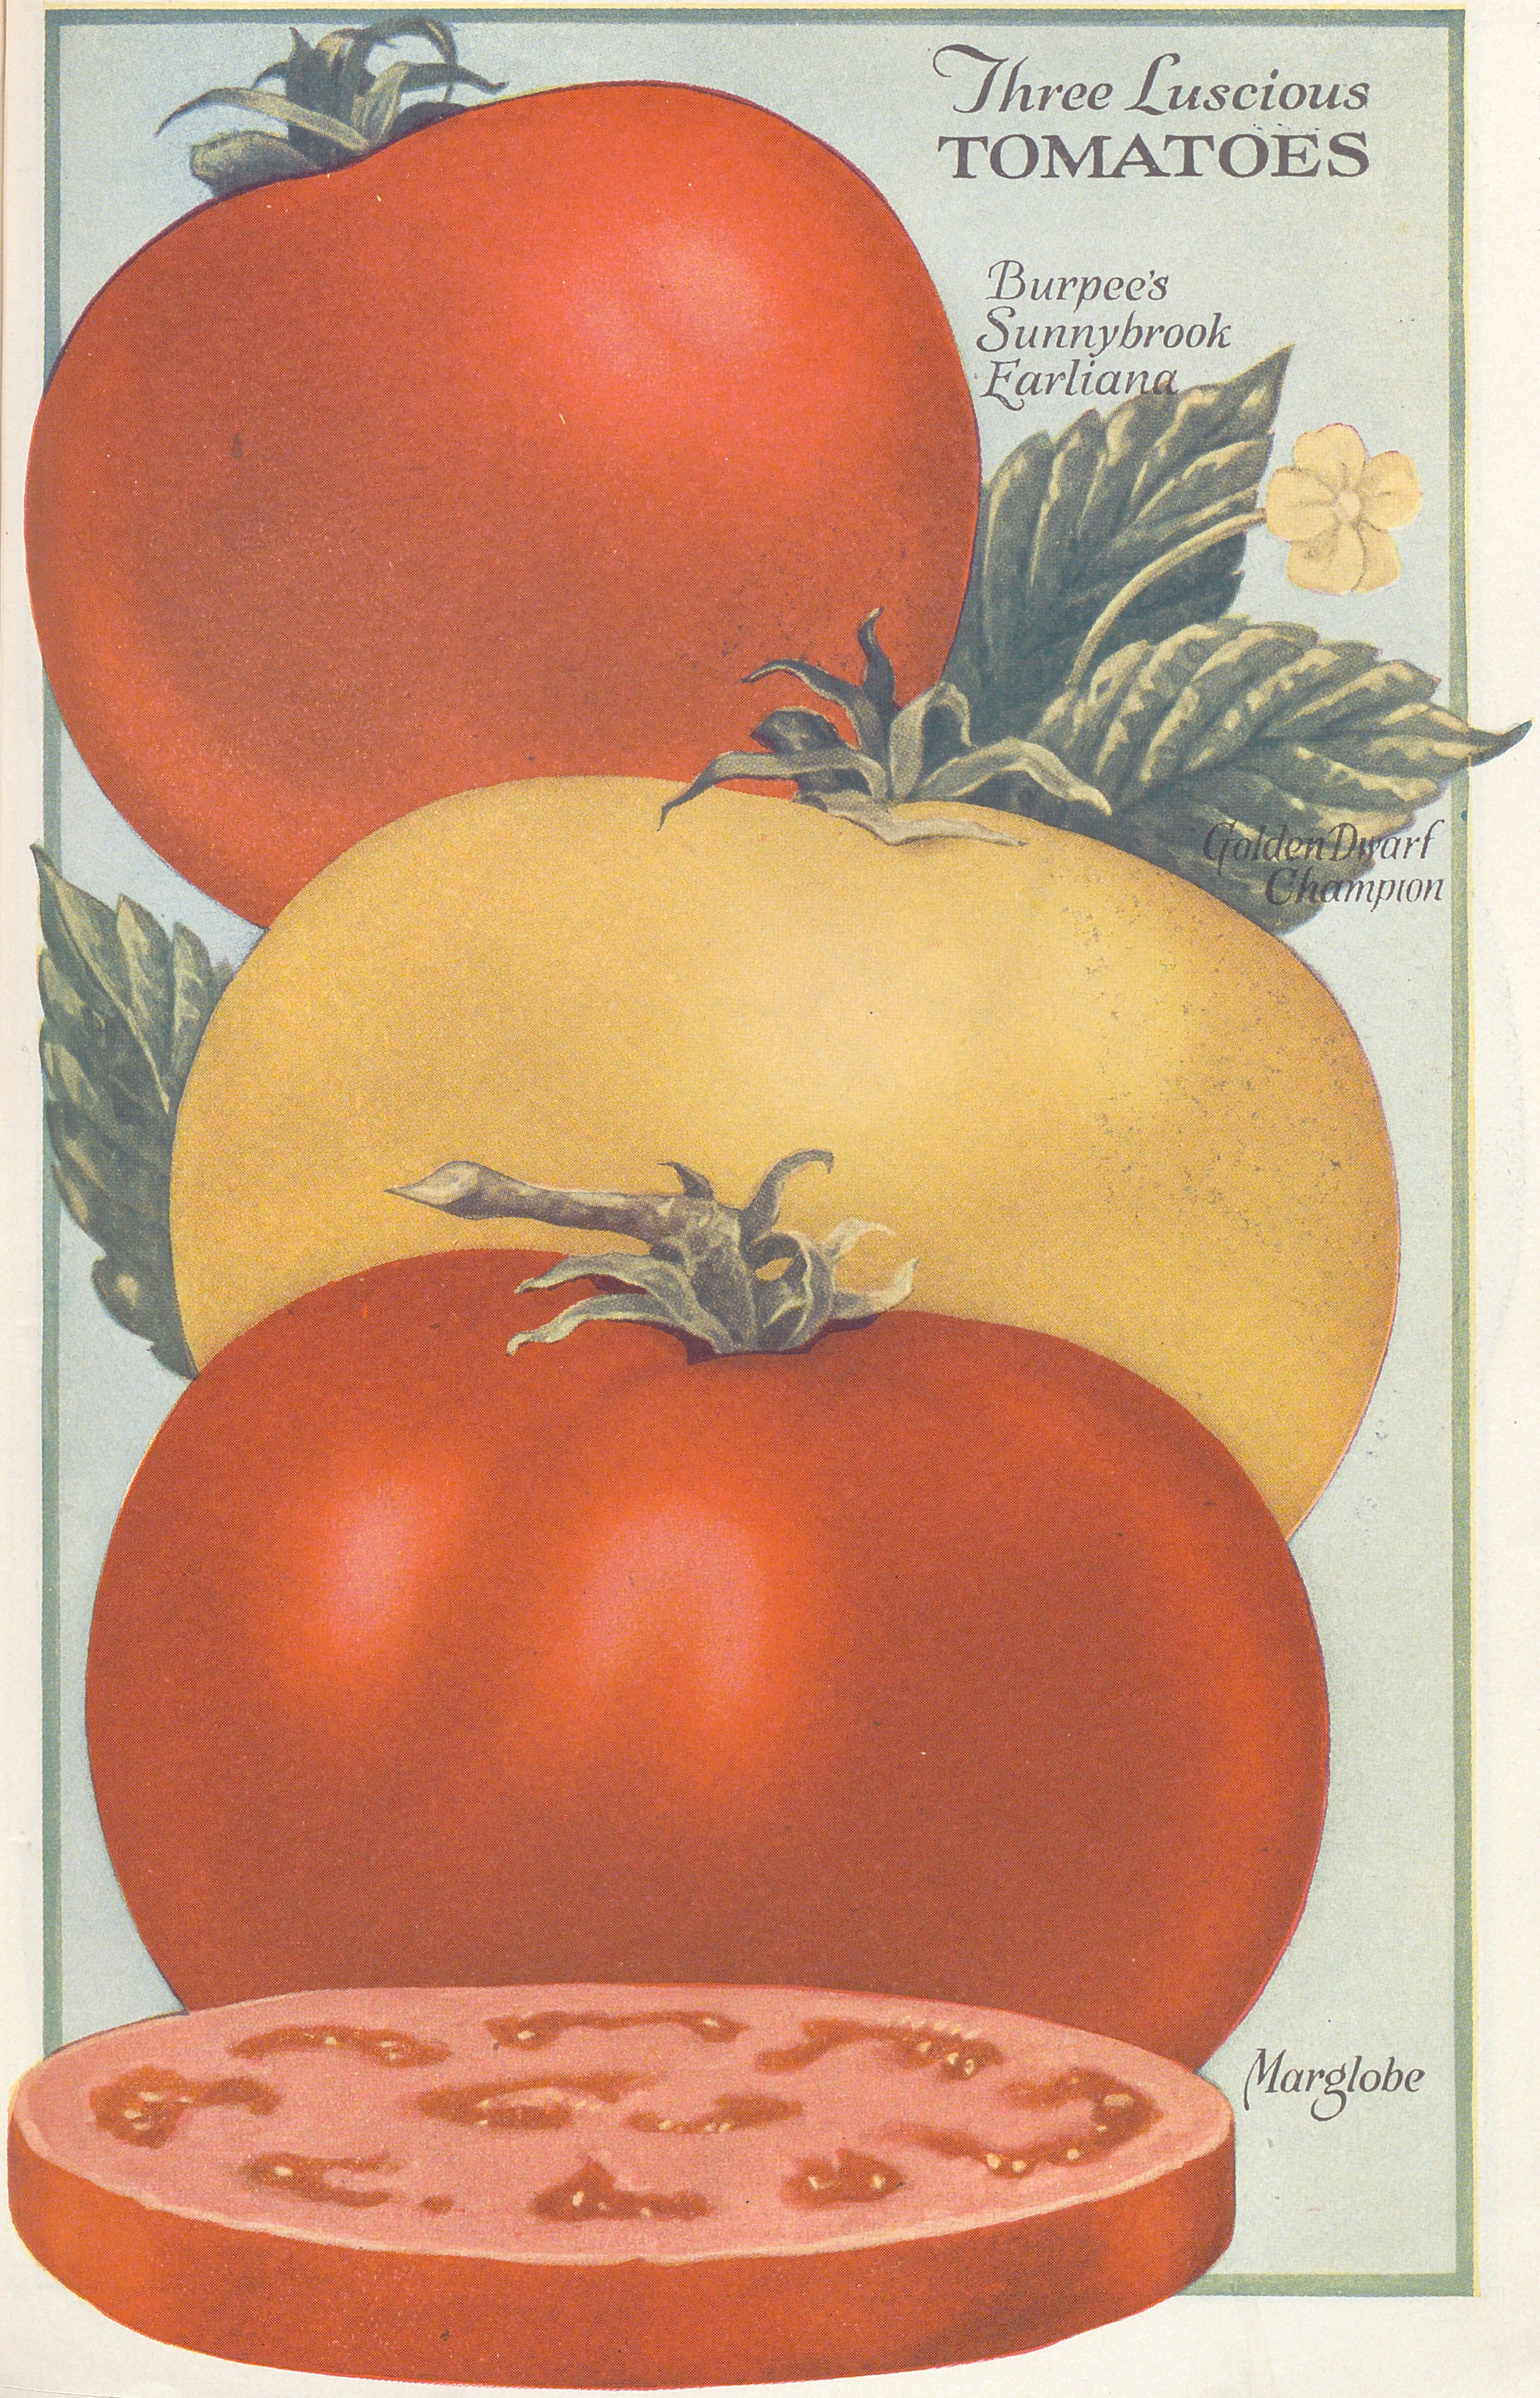 Color illustration of three tomatoes in a variety of colors.